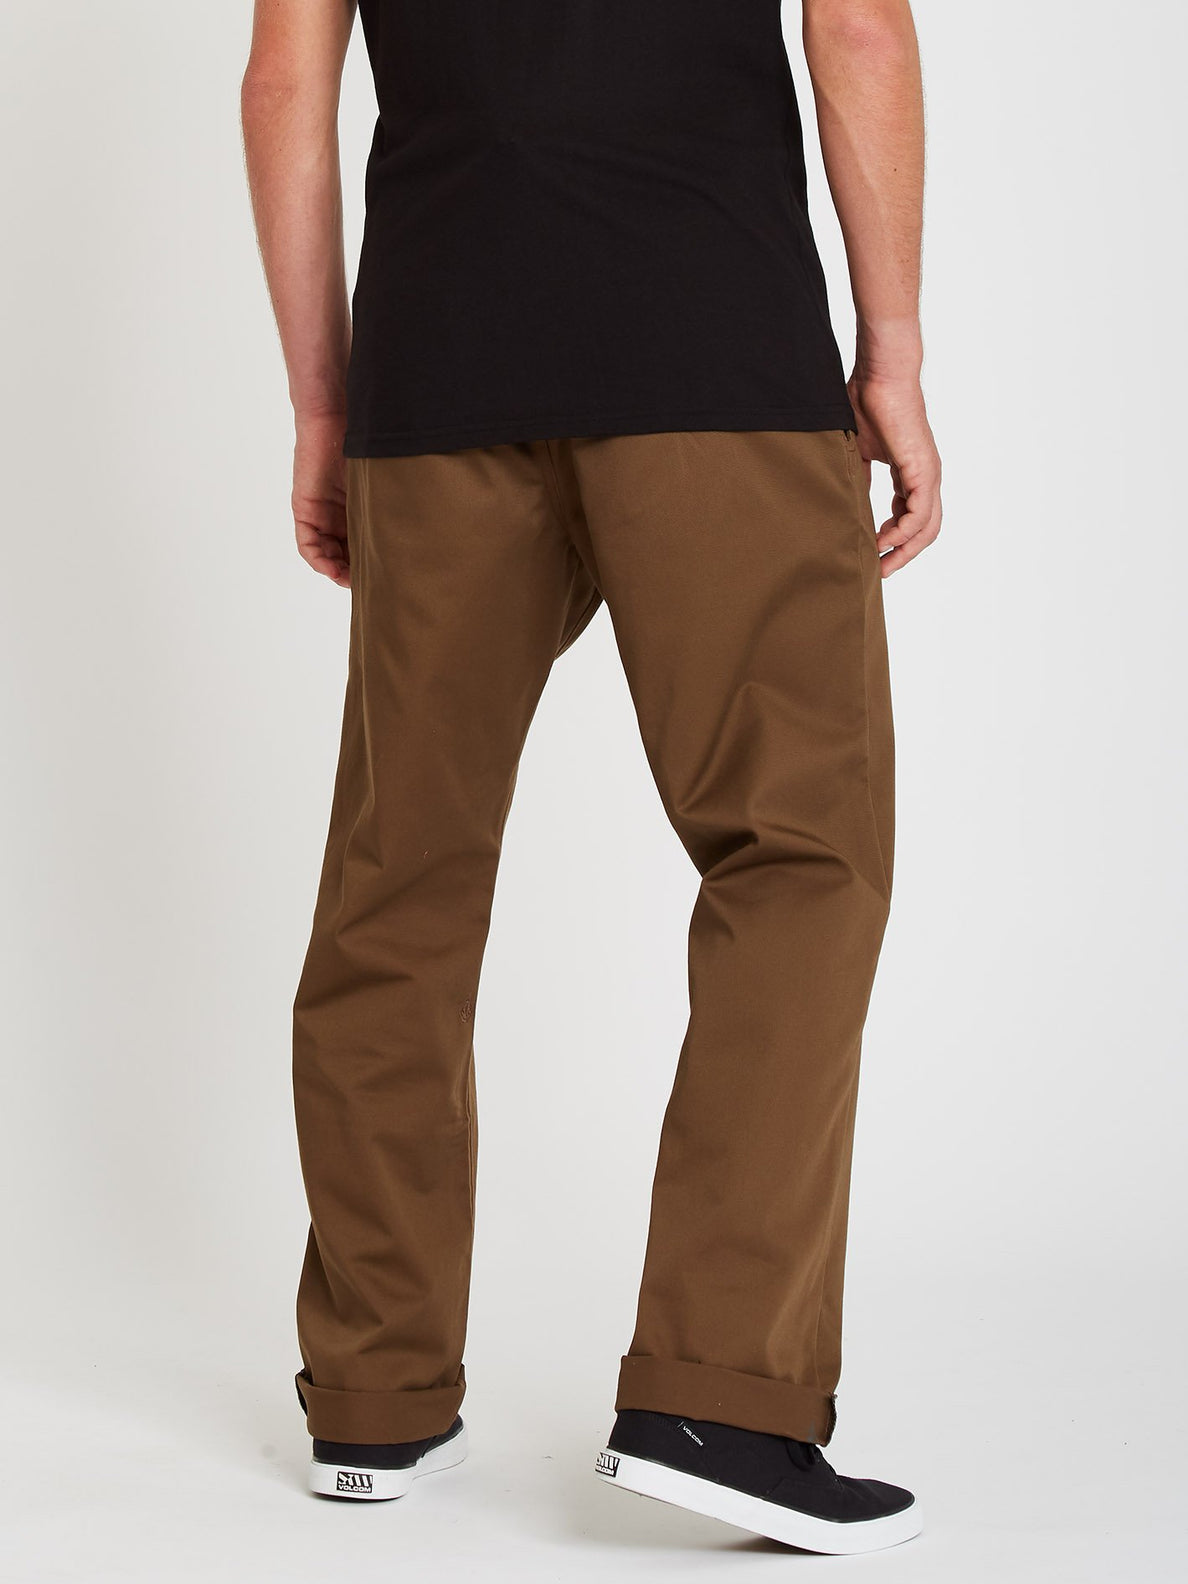 Substance Chino Pant - Vintage Brown (A1112104_VBN) [B]